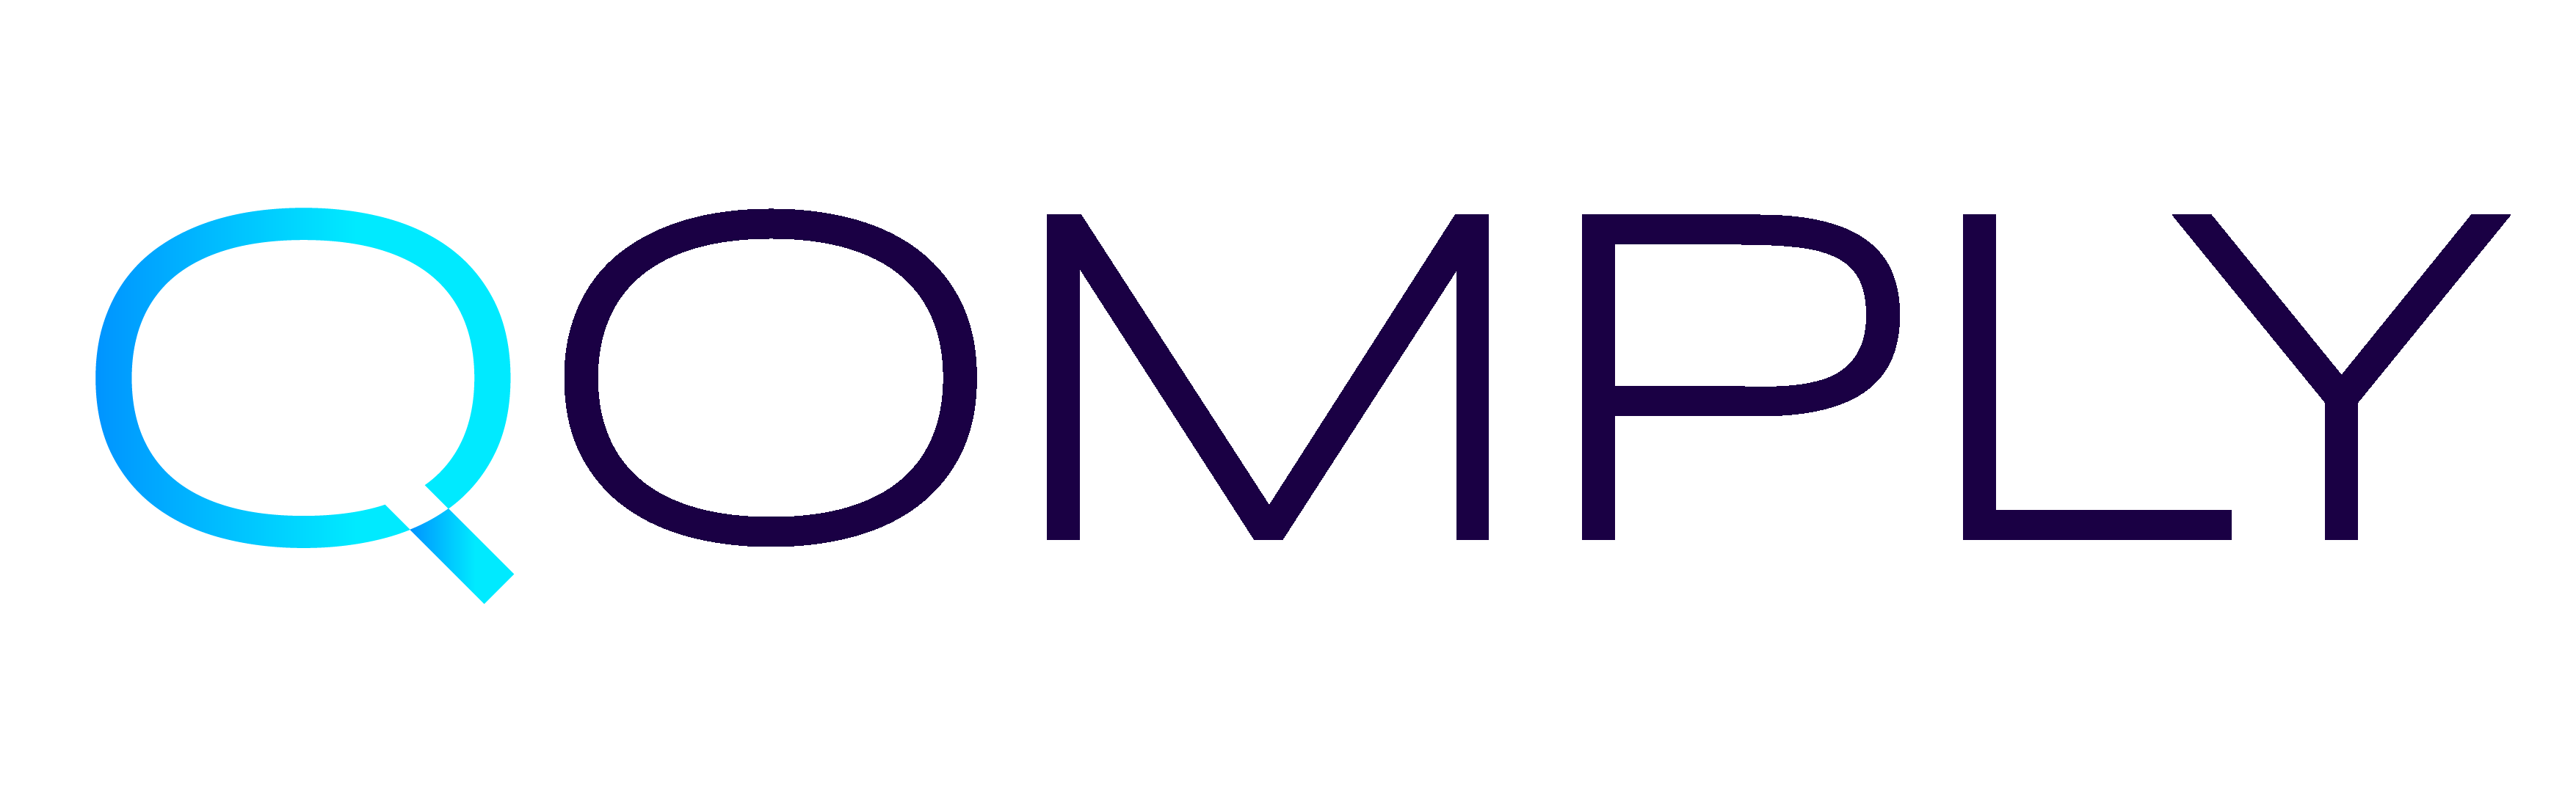 Get Ready for EMIR Refit with Qomply